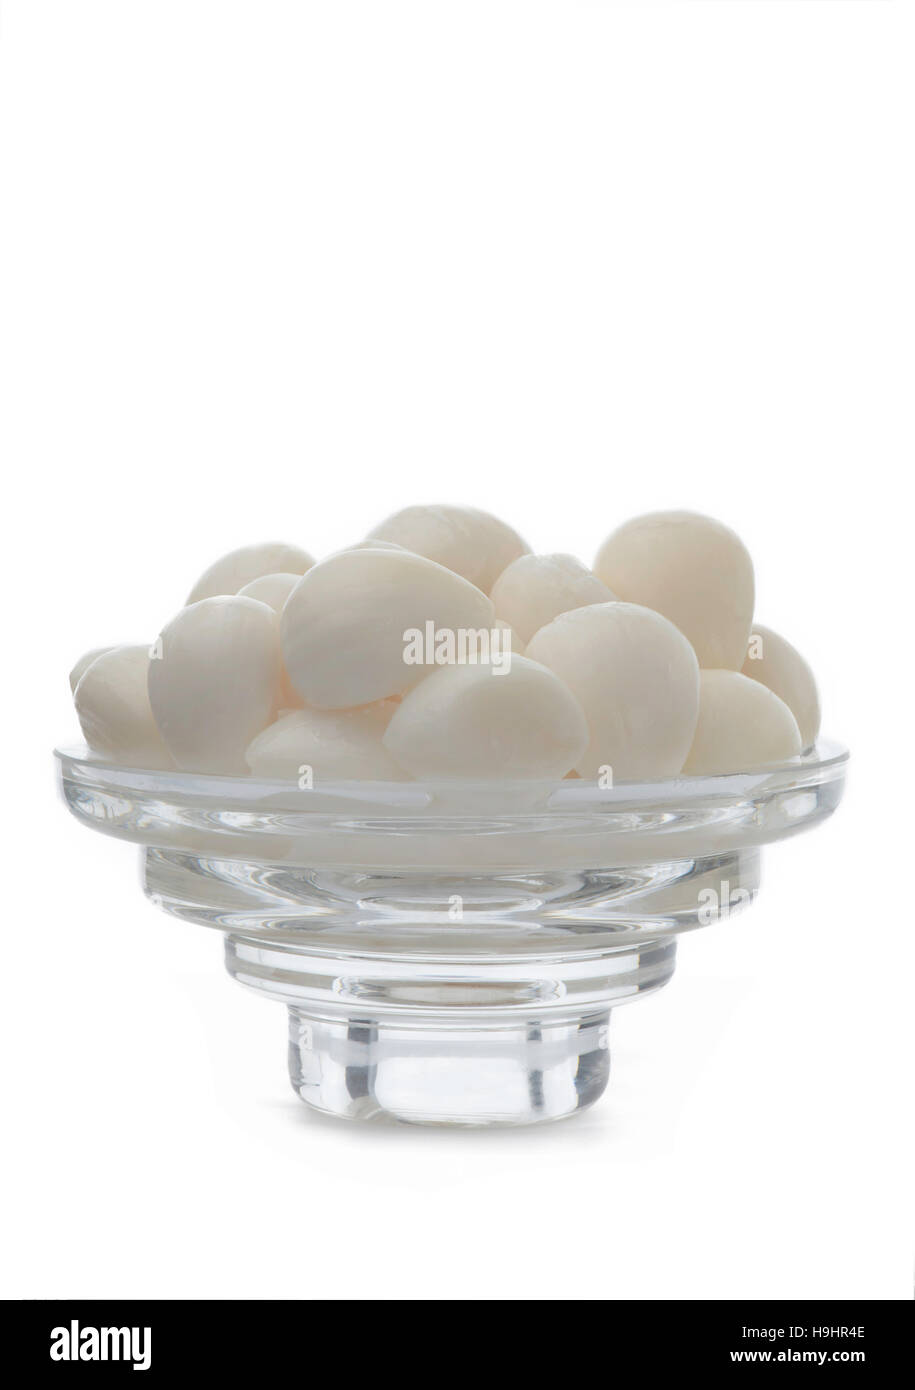 Vertical full frontal view of fresh pickle garlic place on a thick glass dish isolated on a white background with copy space above and below Stock Photo